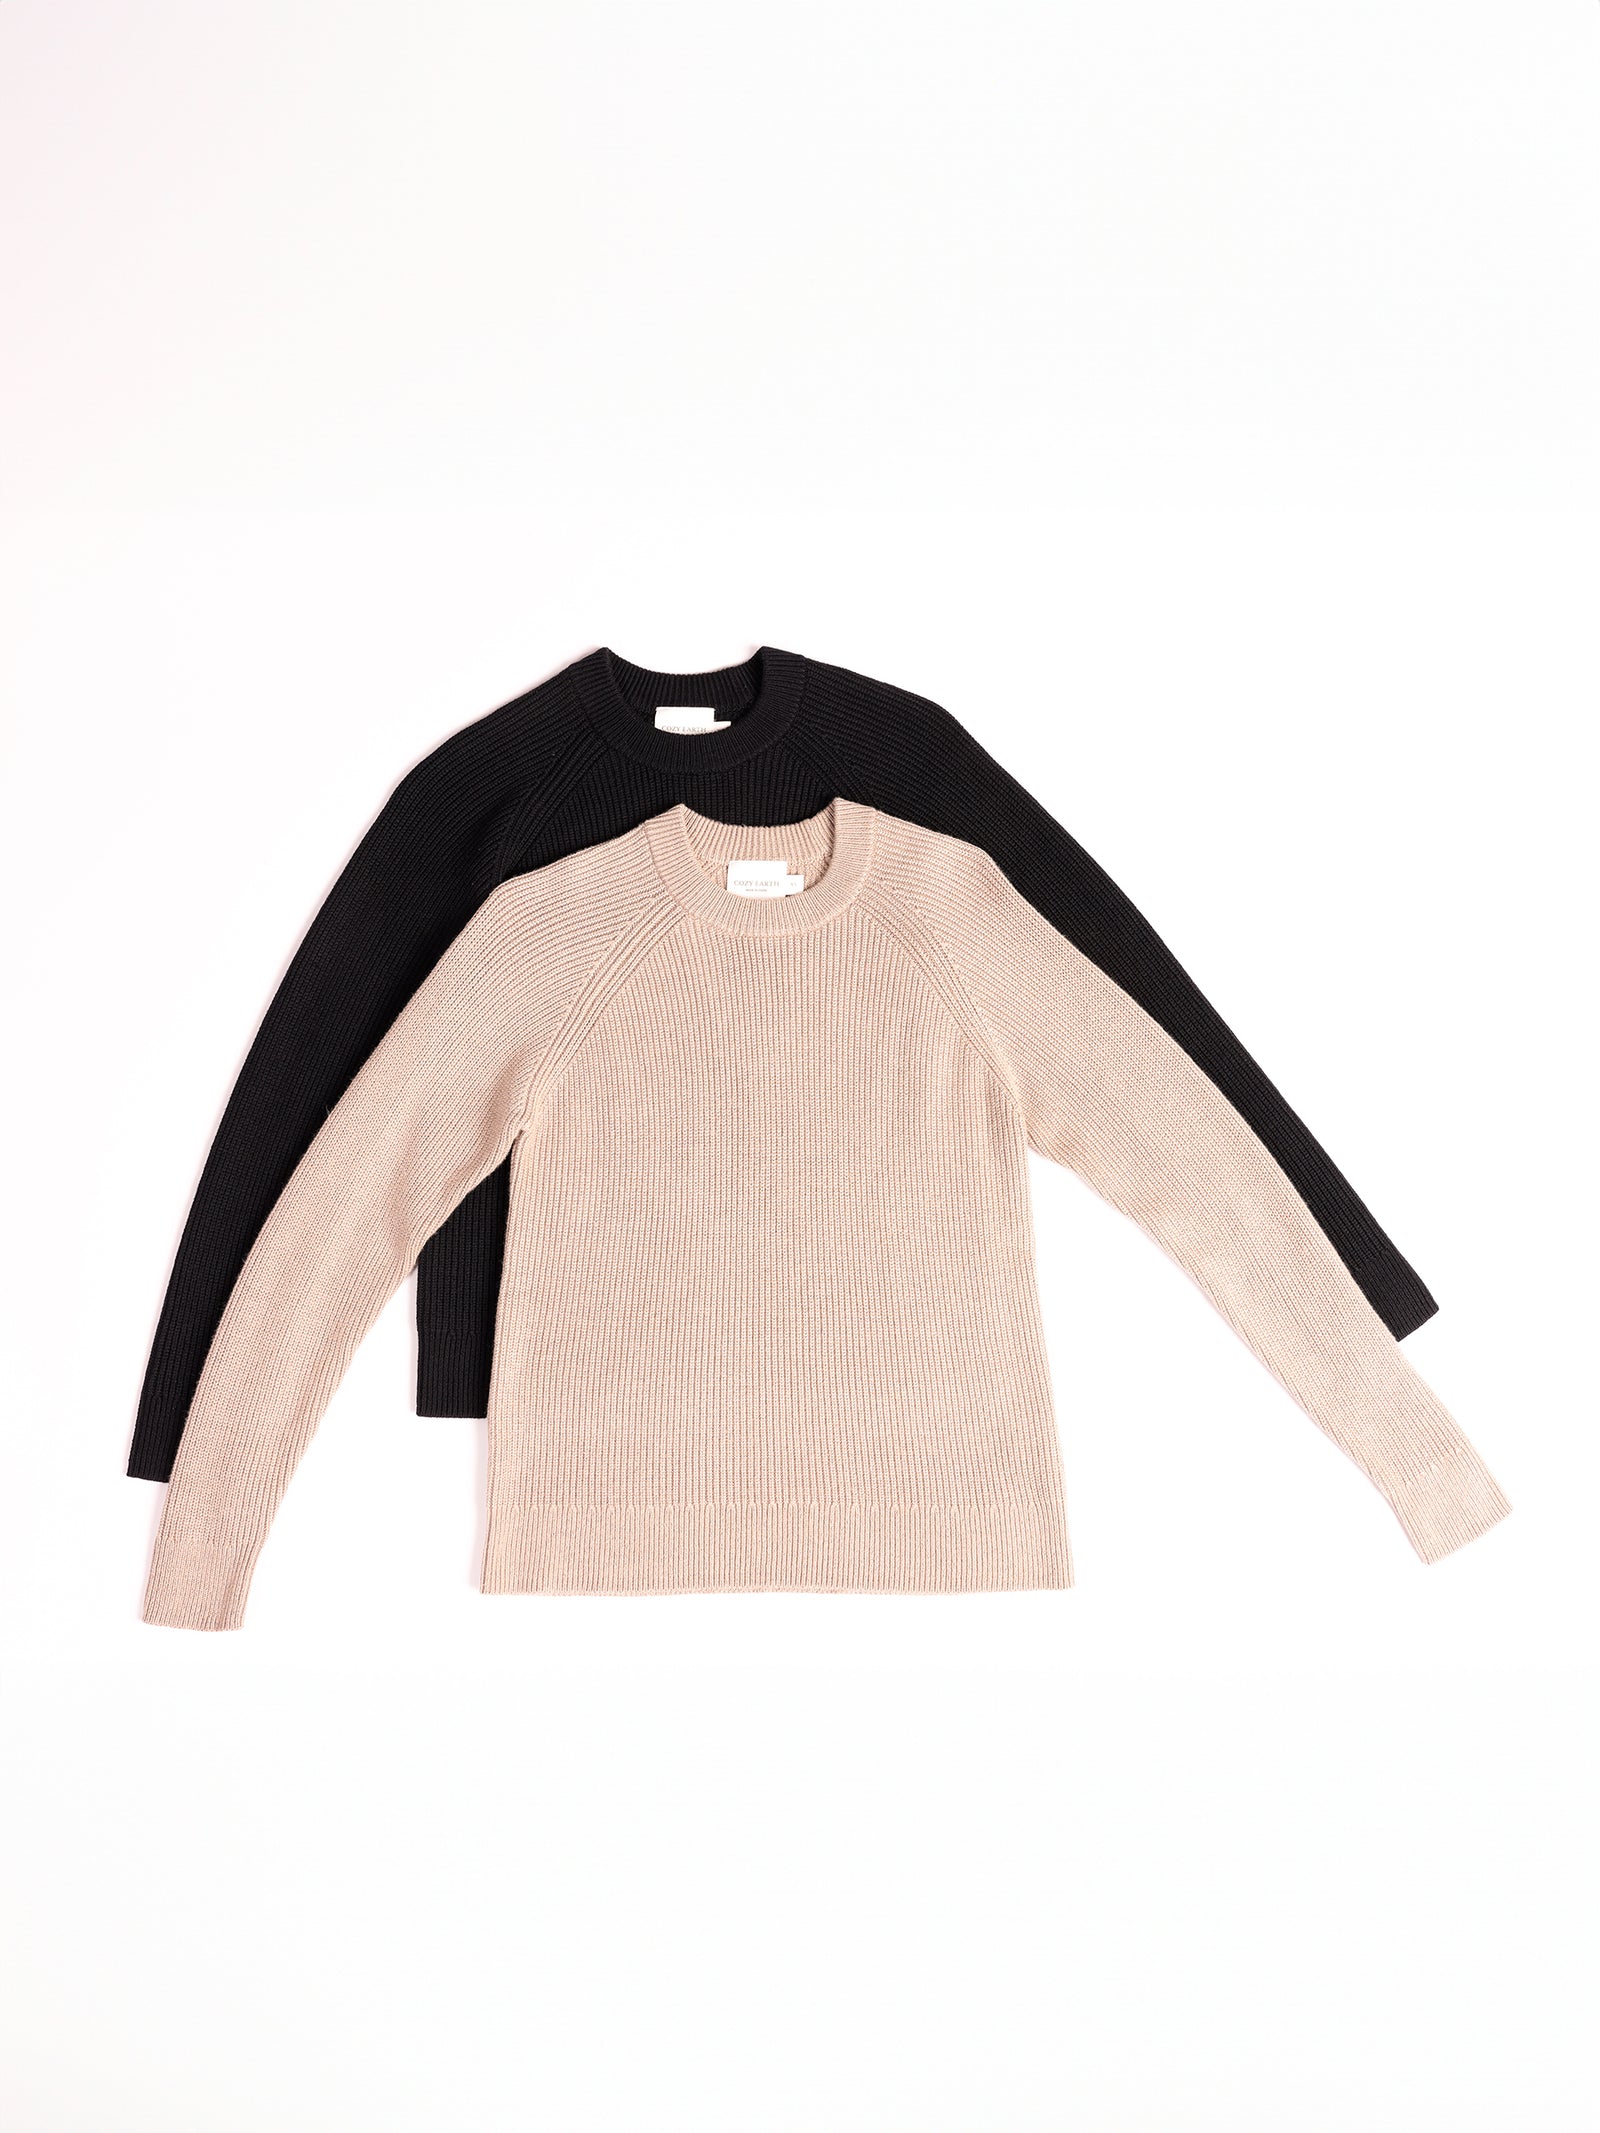 Two Women's Classic Crewneck sweaters from Cozy Earth are laid flat on a white surface. The front sweater is beige, and the back sweater is black. Both feature a crew neck design and a ribbed texture. 